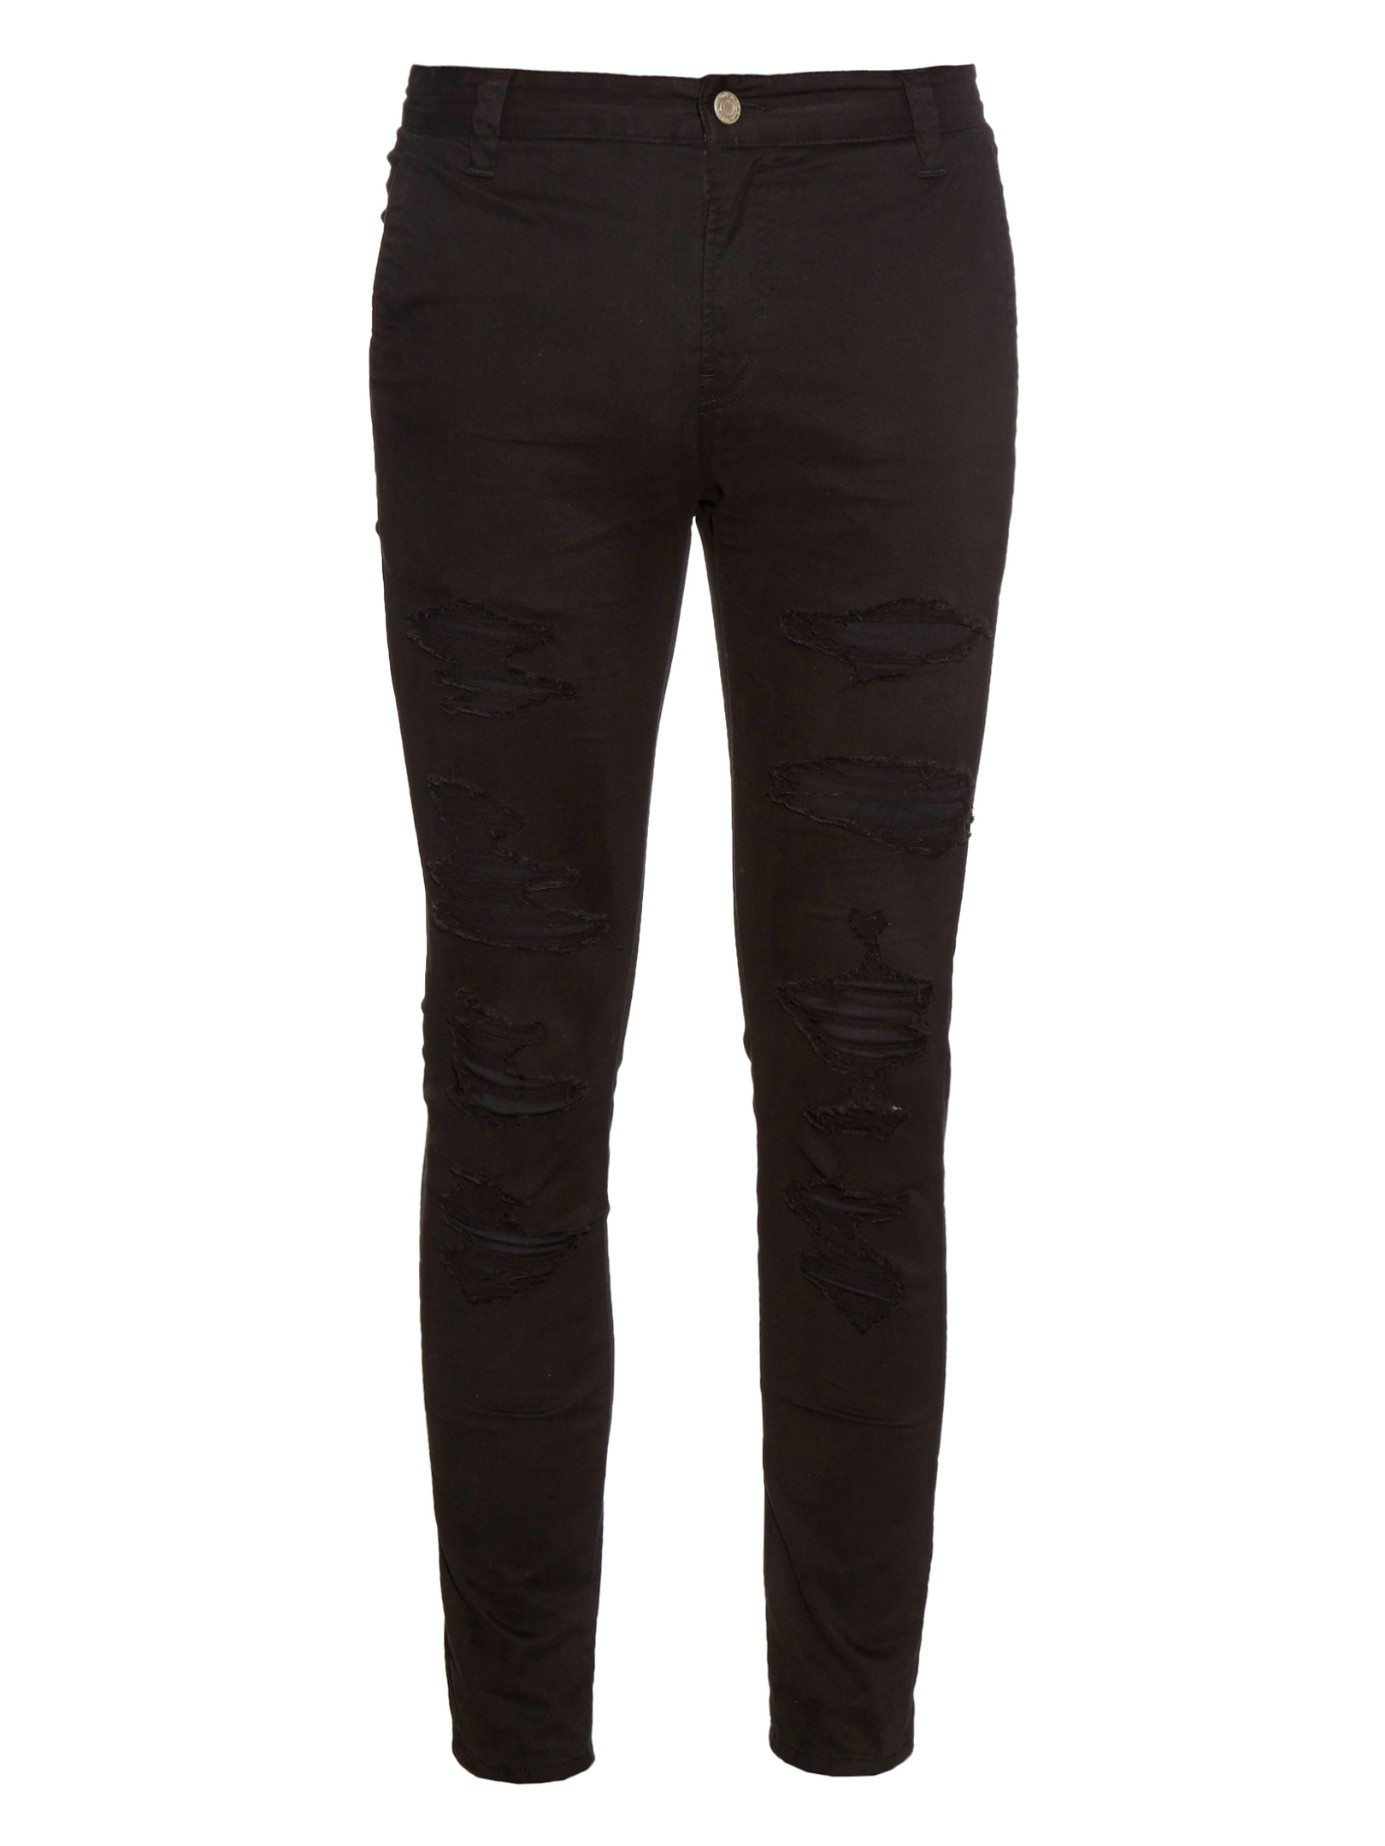 Undercover Distressed Skinny Jeans in Black for Men | Lyst